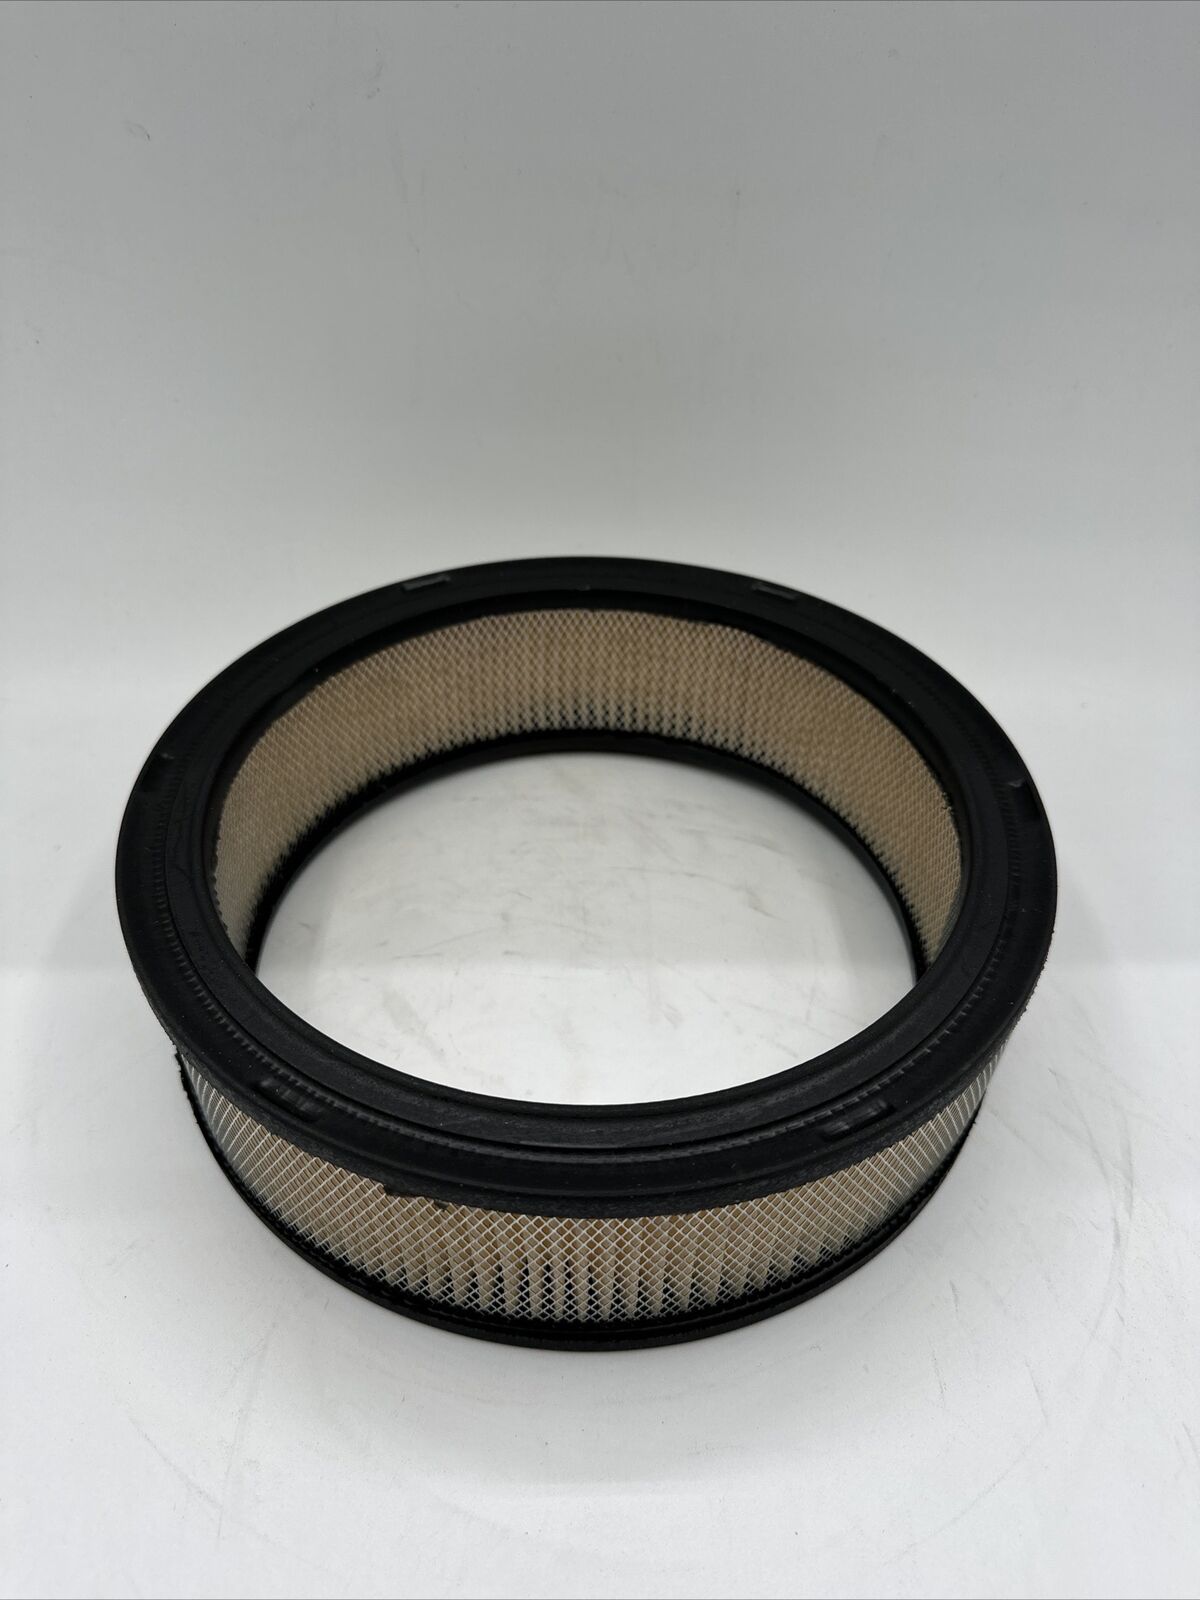 New WIX 46036 Air Filter for Chevrolet Beretta 1990-1991 with 2.2L 4cyl Engine